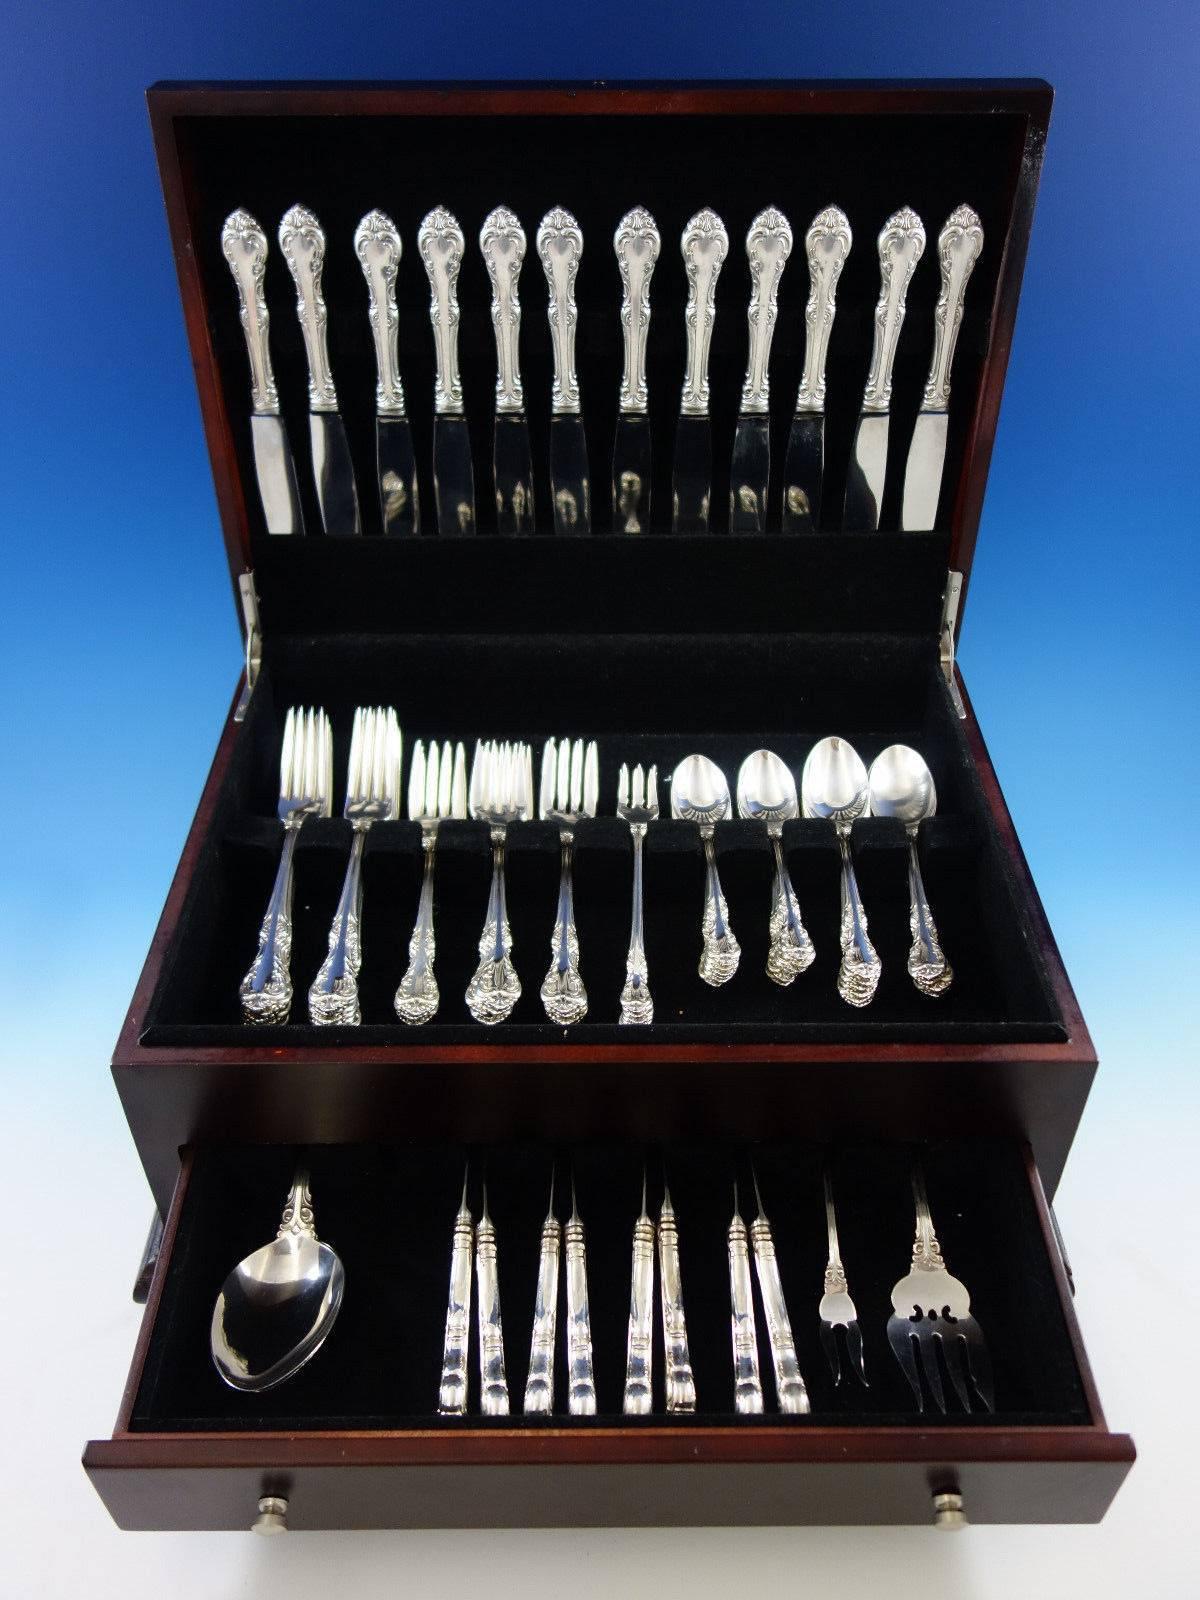 Laurentian by Birks (Canada) sterling silver flatware set, 80 pieces. This set includes: 

12 knives, 8 5/8